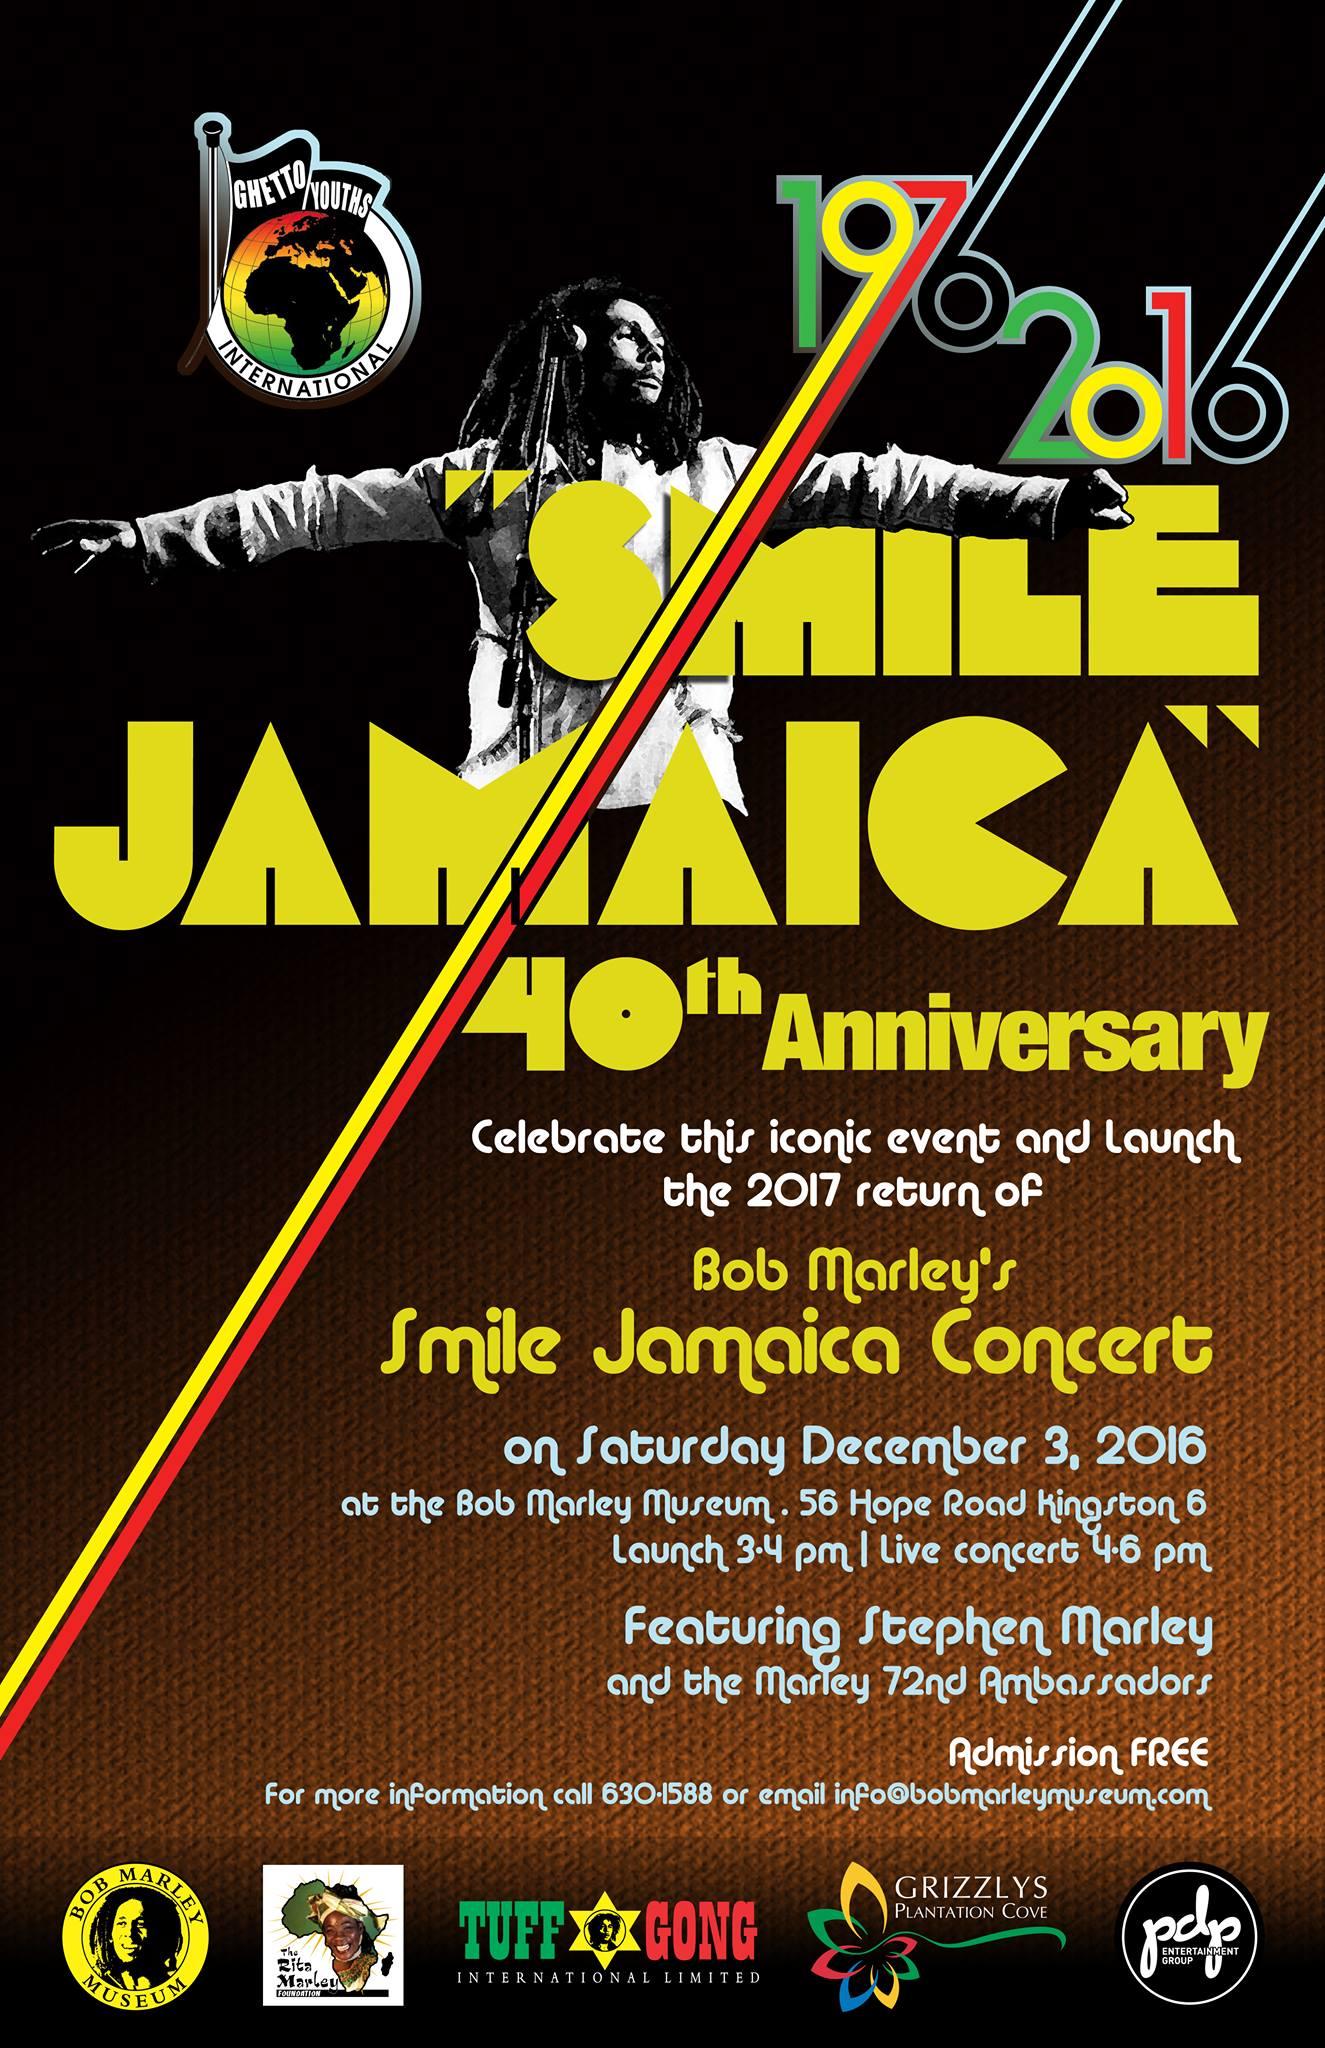 40th Anniversary and 2017 launch of Smile Jamaica